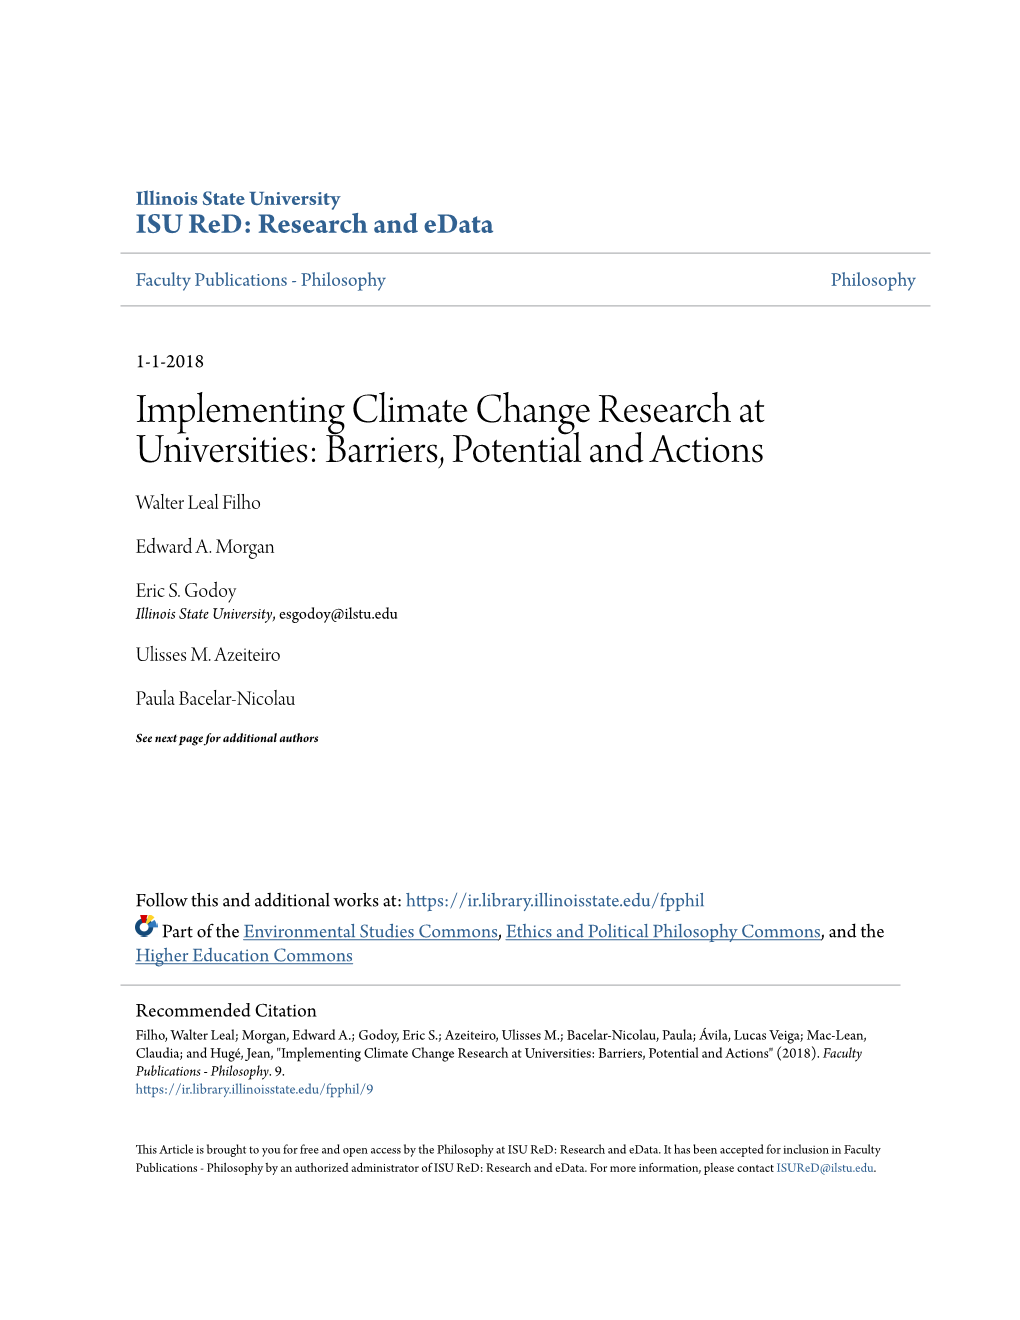 Implementing Climate Change Research at Universities: Barriers, Potential and Actions Walter Leal Filho